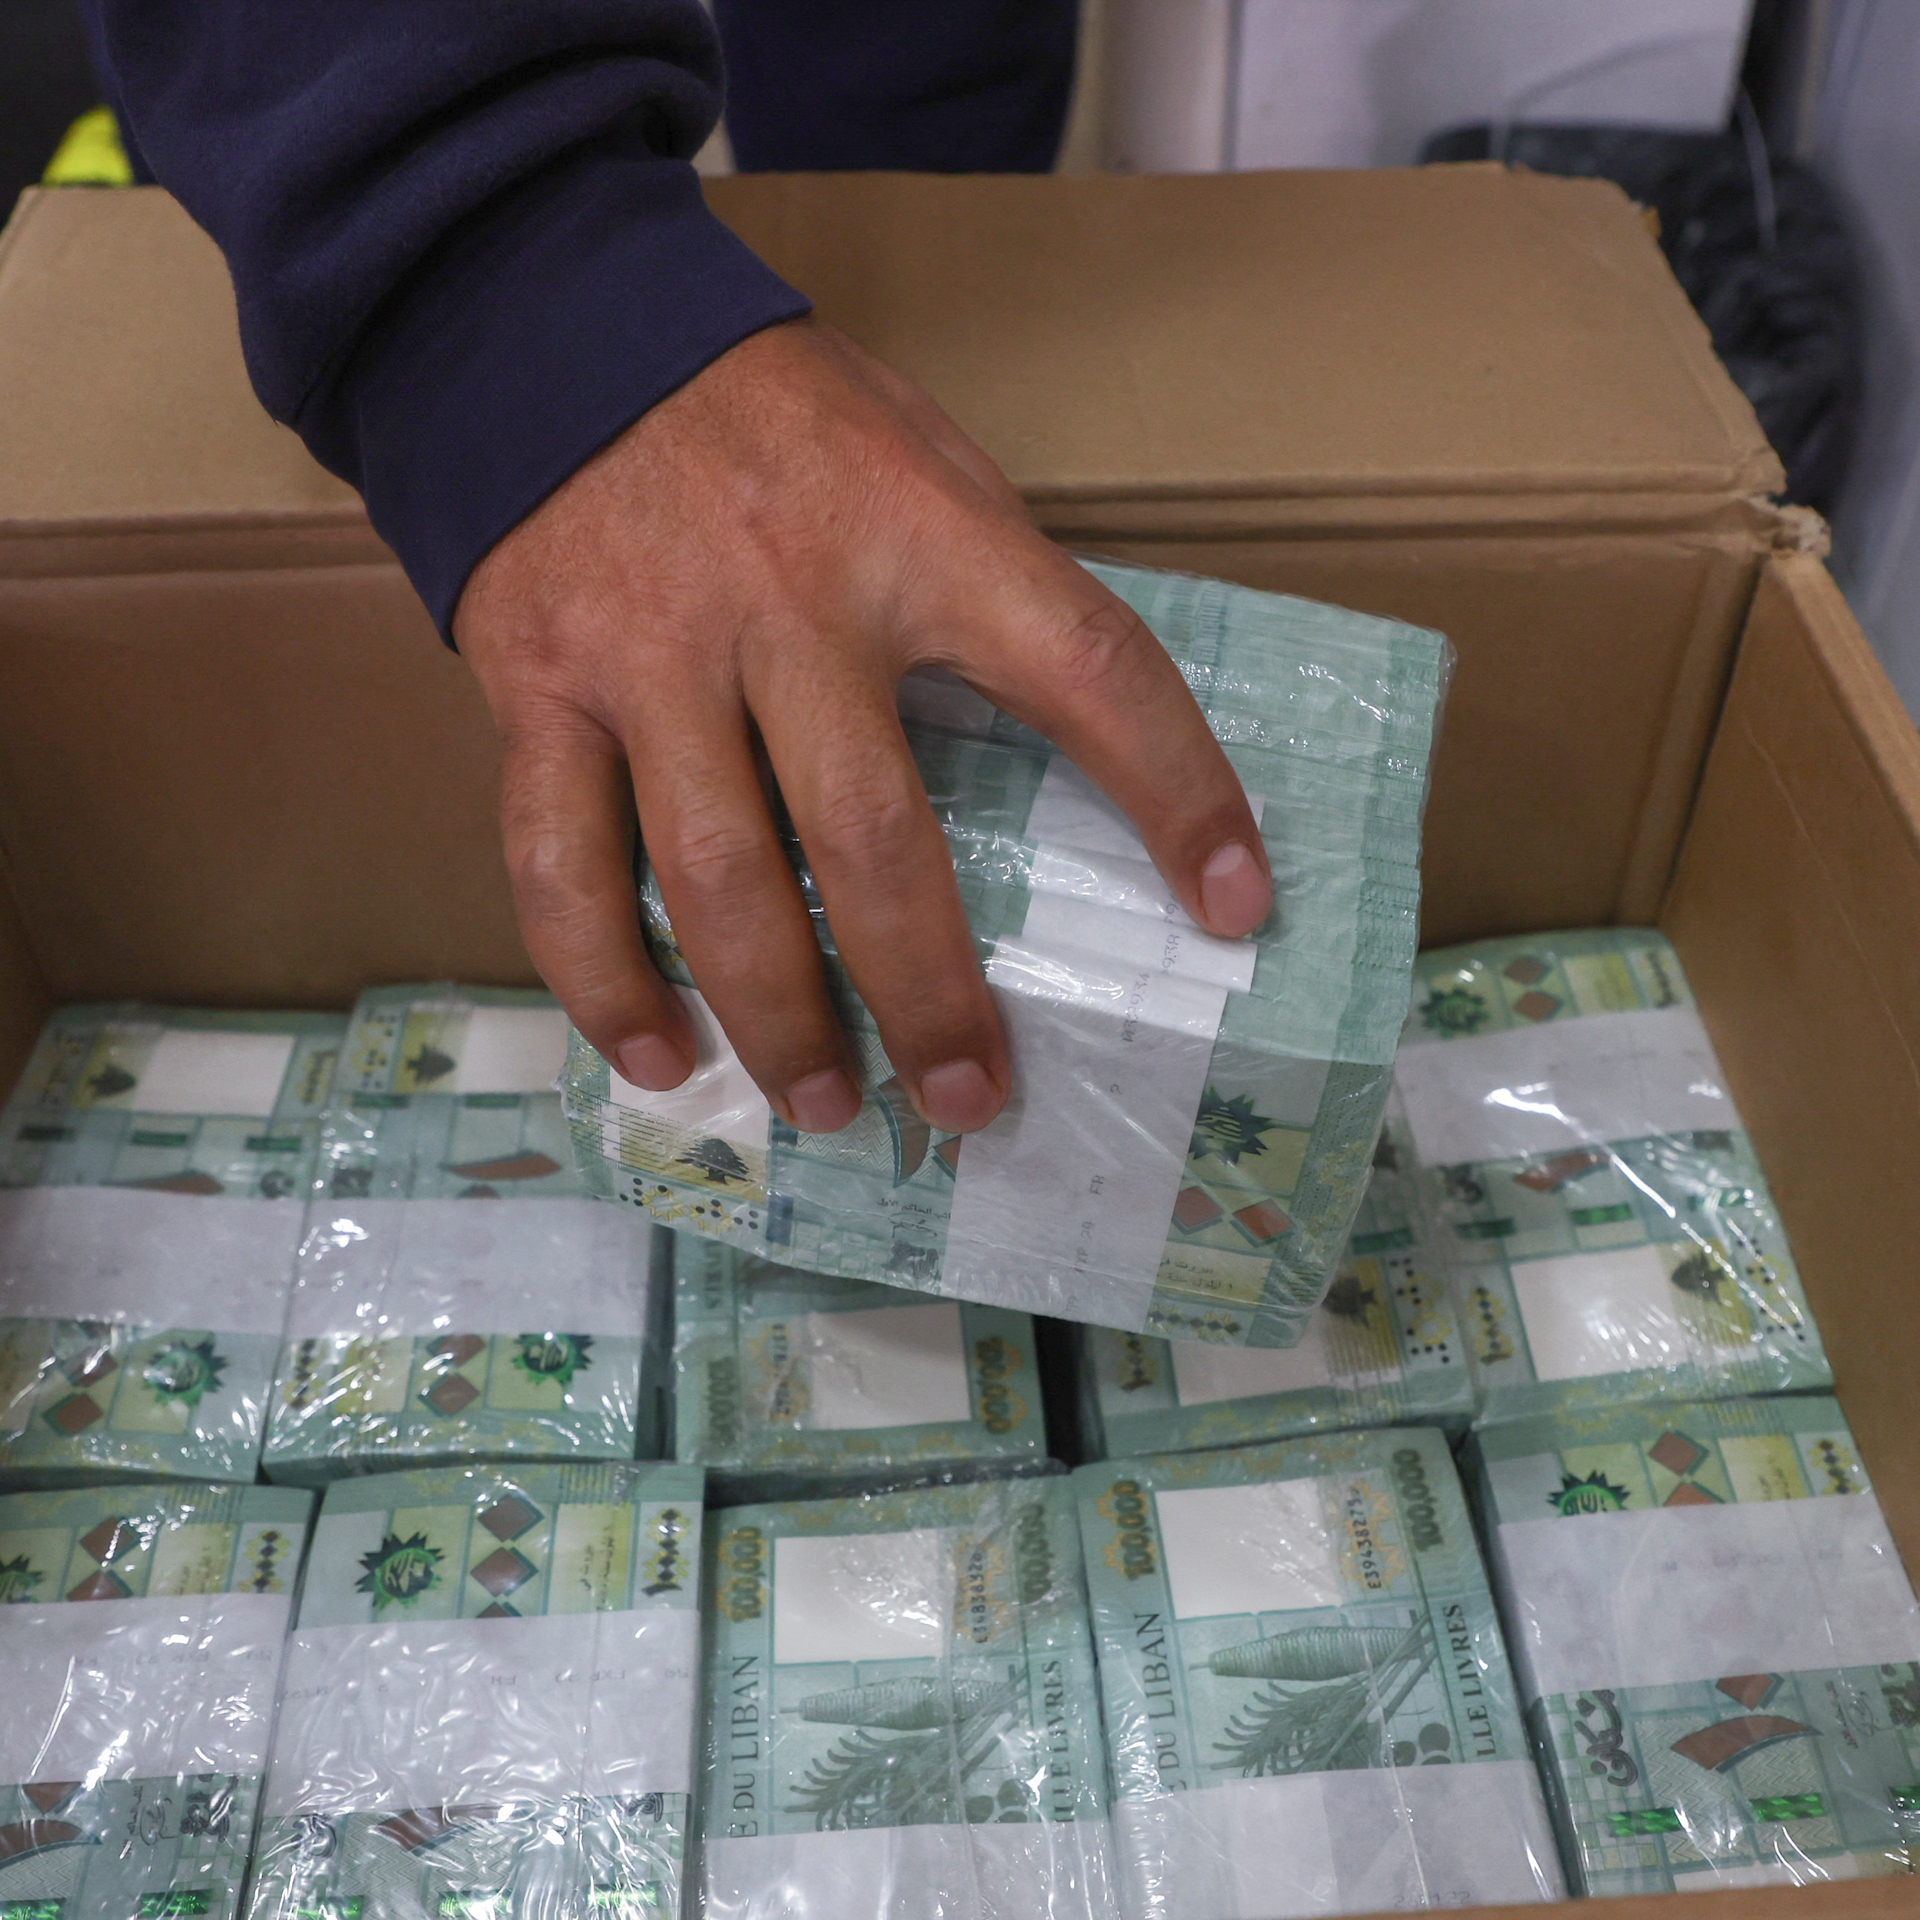 Why cash is king in Lebanon